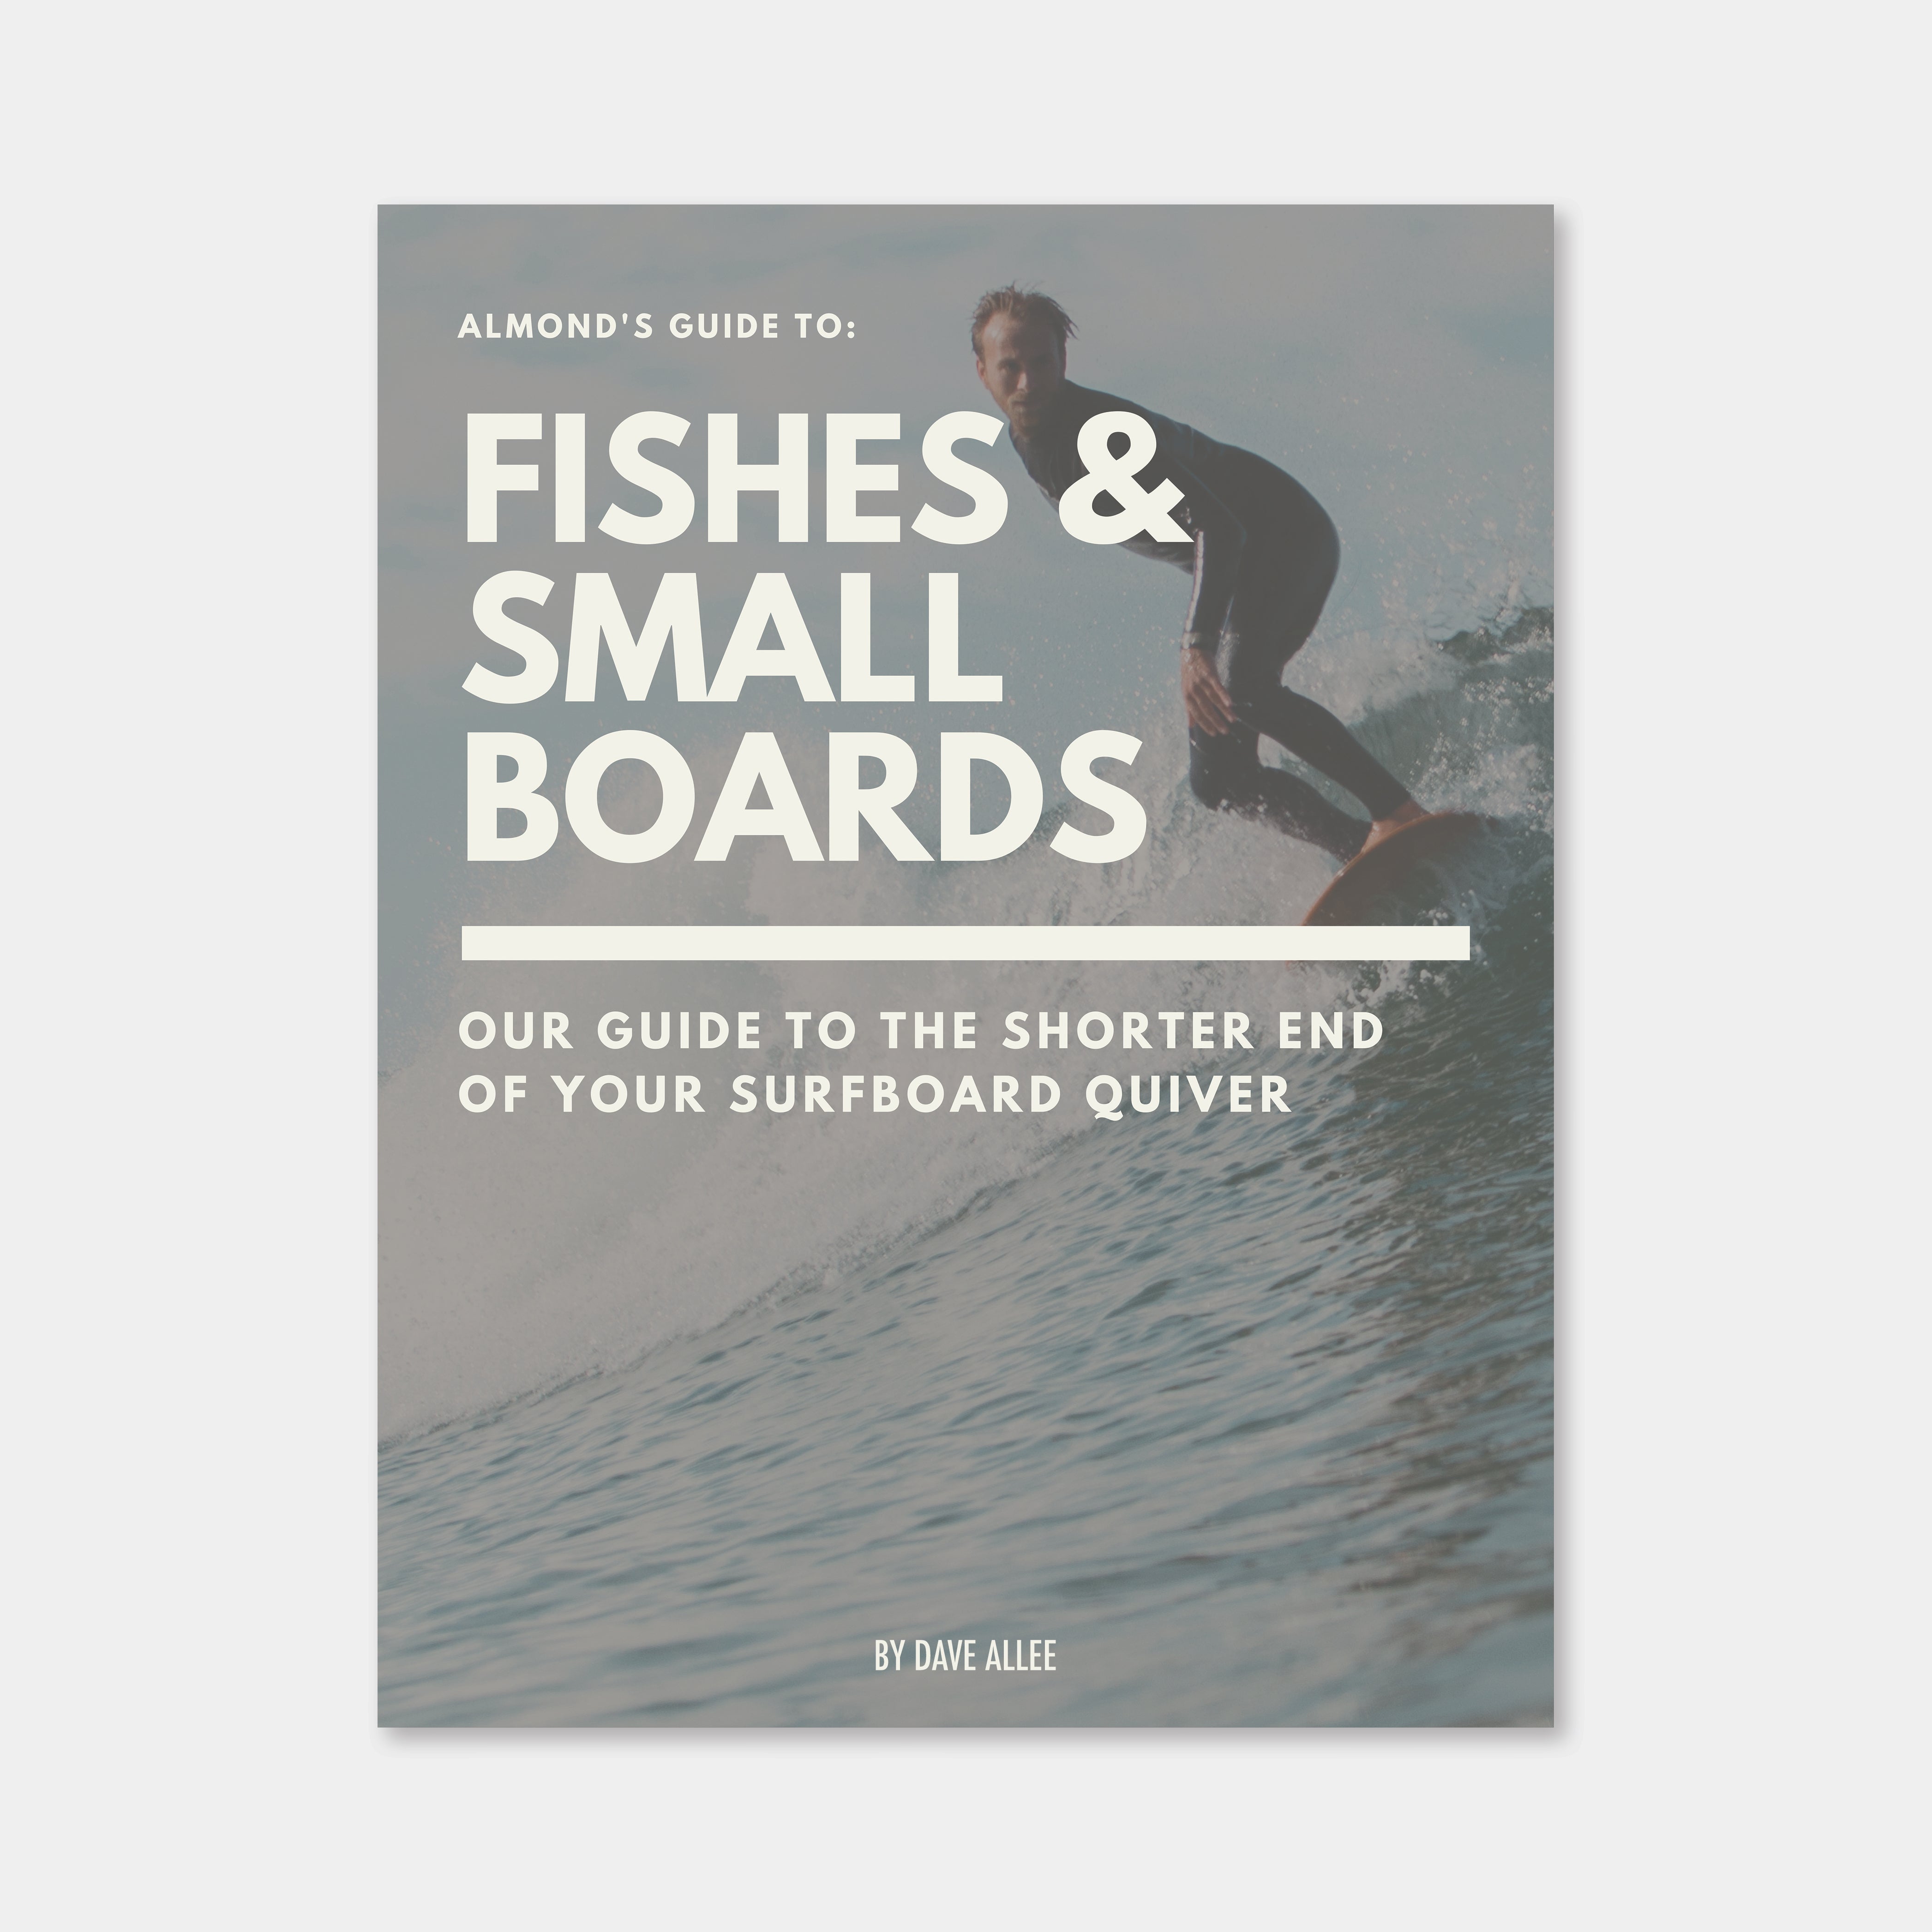 Almond's Guide to Fishes & Small Boards